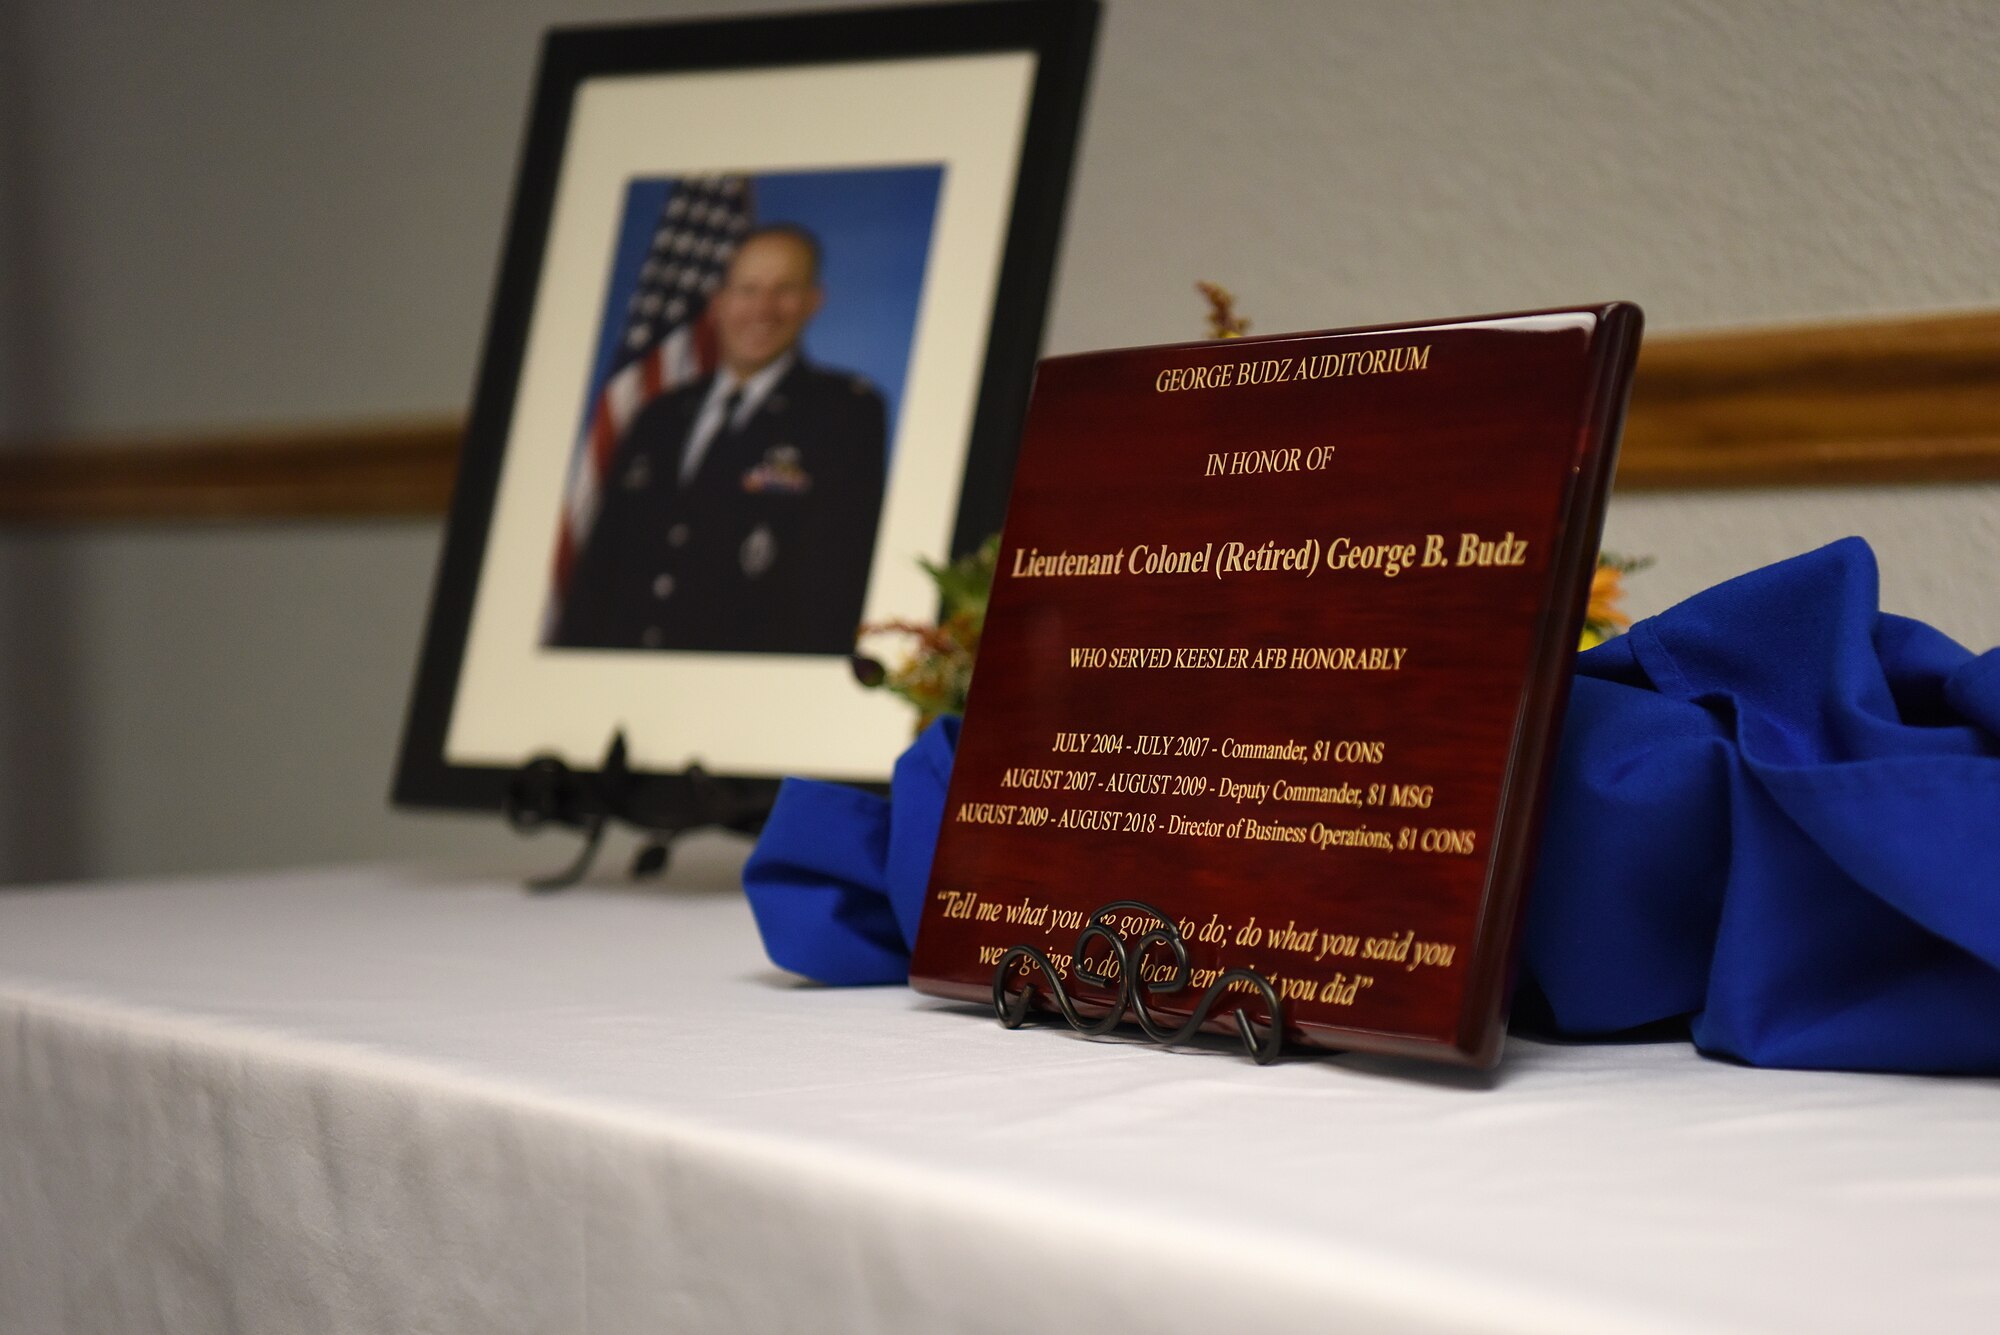 A plaque is displayed during the Sablich Center Auditorium room dedication ceremony for George Budz inside the Sablich Center at Keesler Air Force Base, Mississippi, Oct. 31, 2019. The auditorium has been renamed after Budz who passed away Aug. 3, 2018. Budz served as the 81st Contracting Squadron commander, the 81st Mission Support Group deputy commander and worked nine years in civil service after he retired as a lieutenant colonel. (U.S. Air Force photo by Senior Airman Suzie Plotnikov)